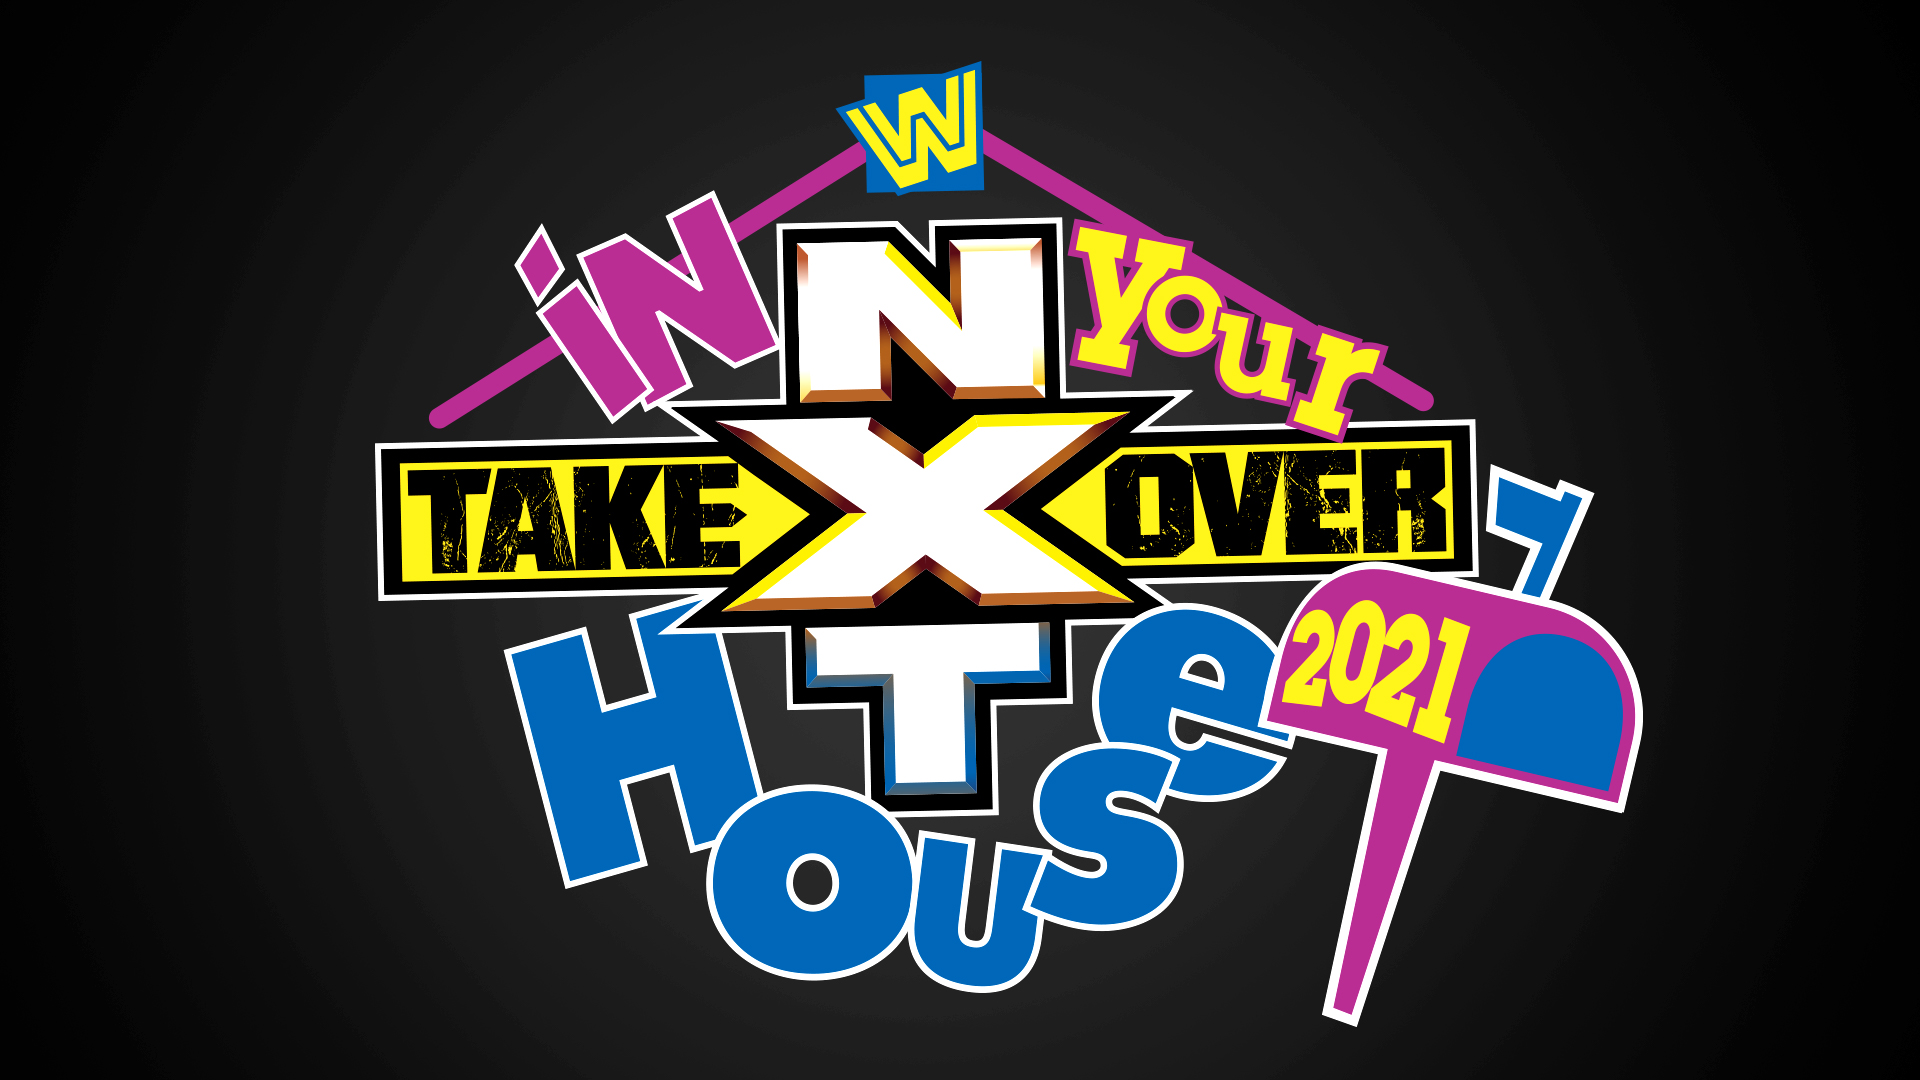 Wwe Nxt Takeover In Your House 21 Results Viewing Party More